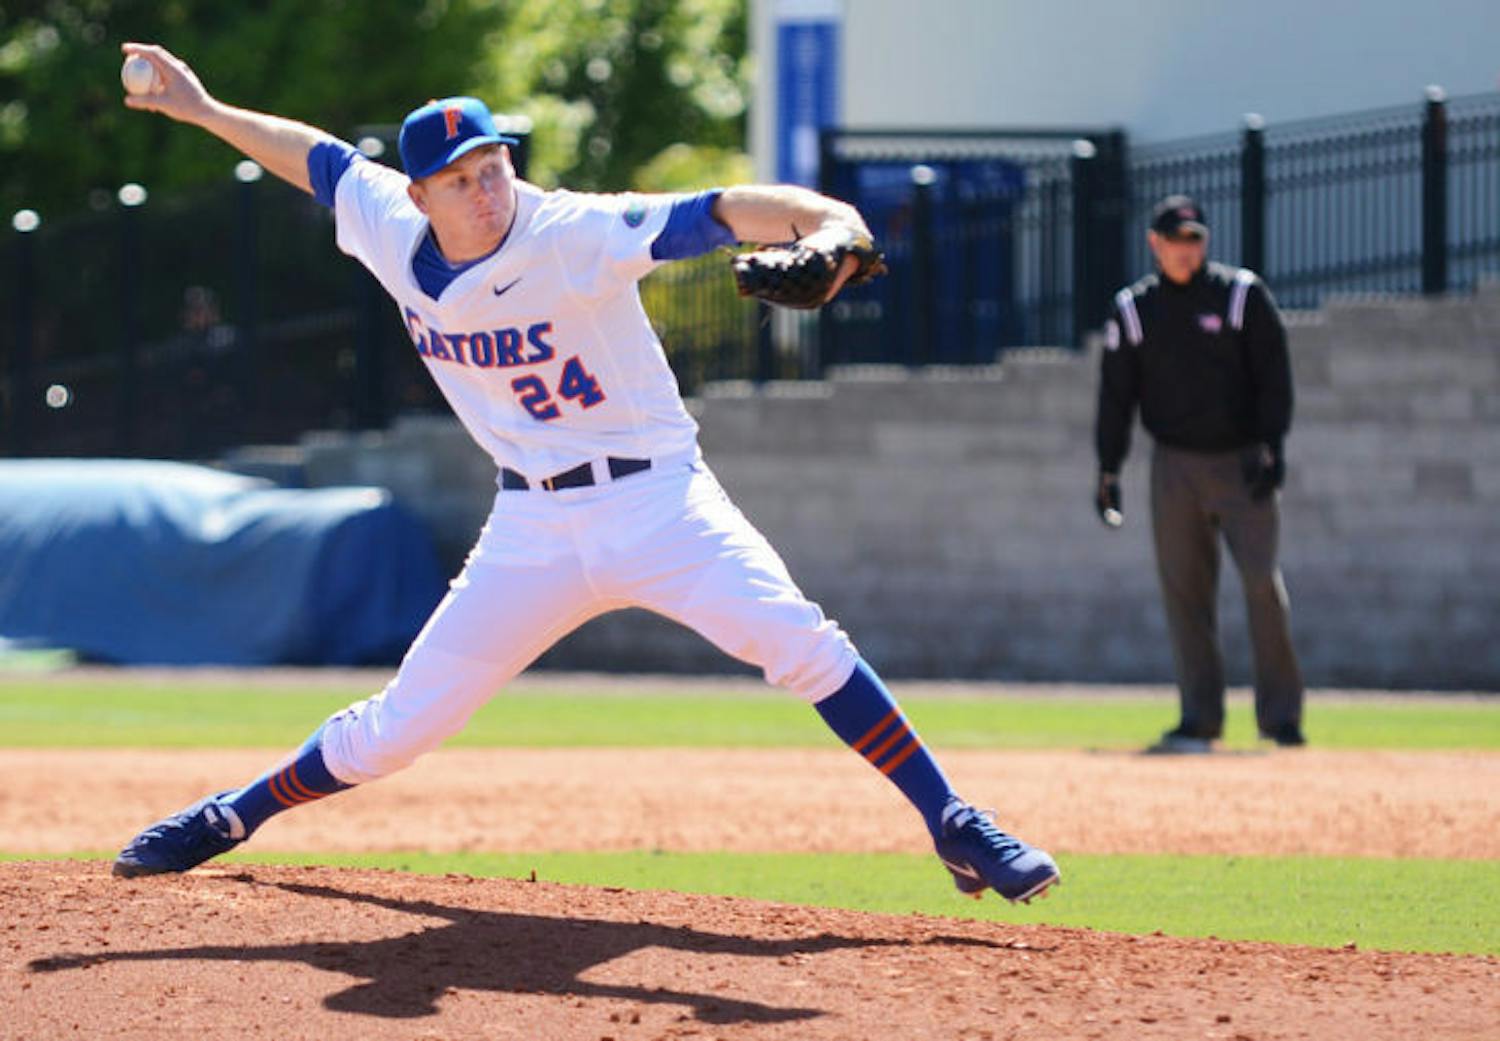 Sophomore pitcher Ryan Harris throws a pitch during Florida’s 16-5 victory against Duke on Sunday at McKethan Stadium. Harris and the UF pitching staff have issued seven leadoff walks in 48 innings this season. Three of the free passes have sparked two-run innings by the opposition.
